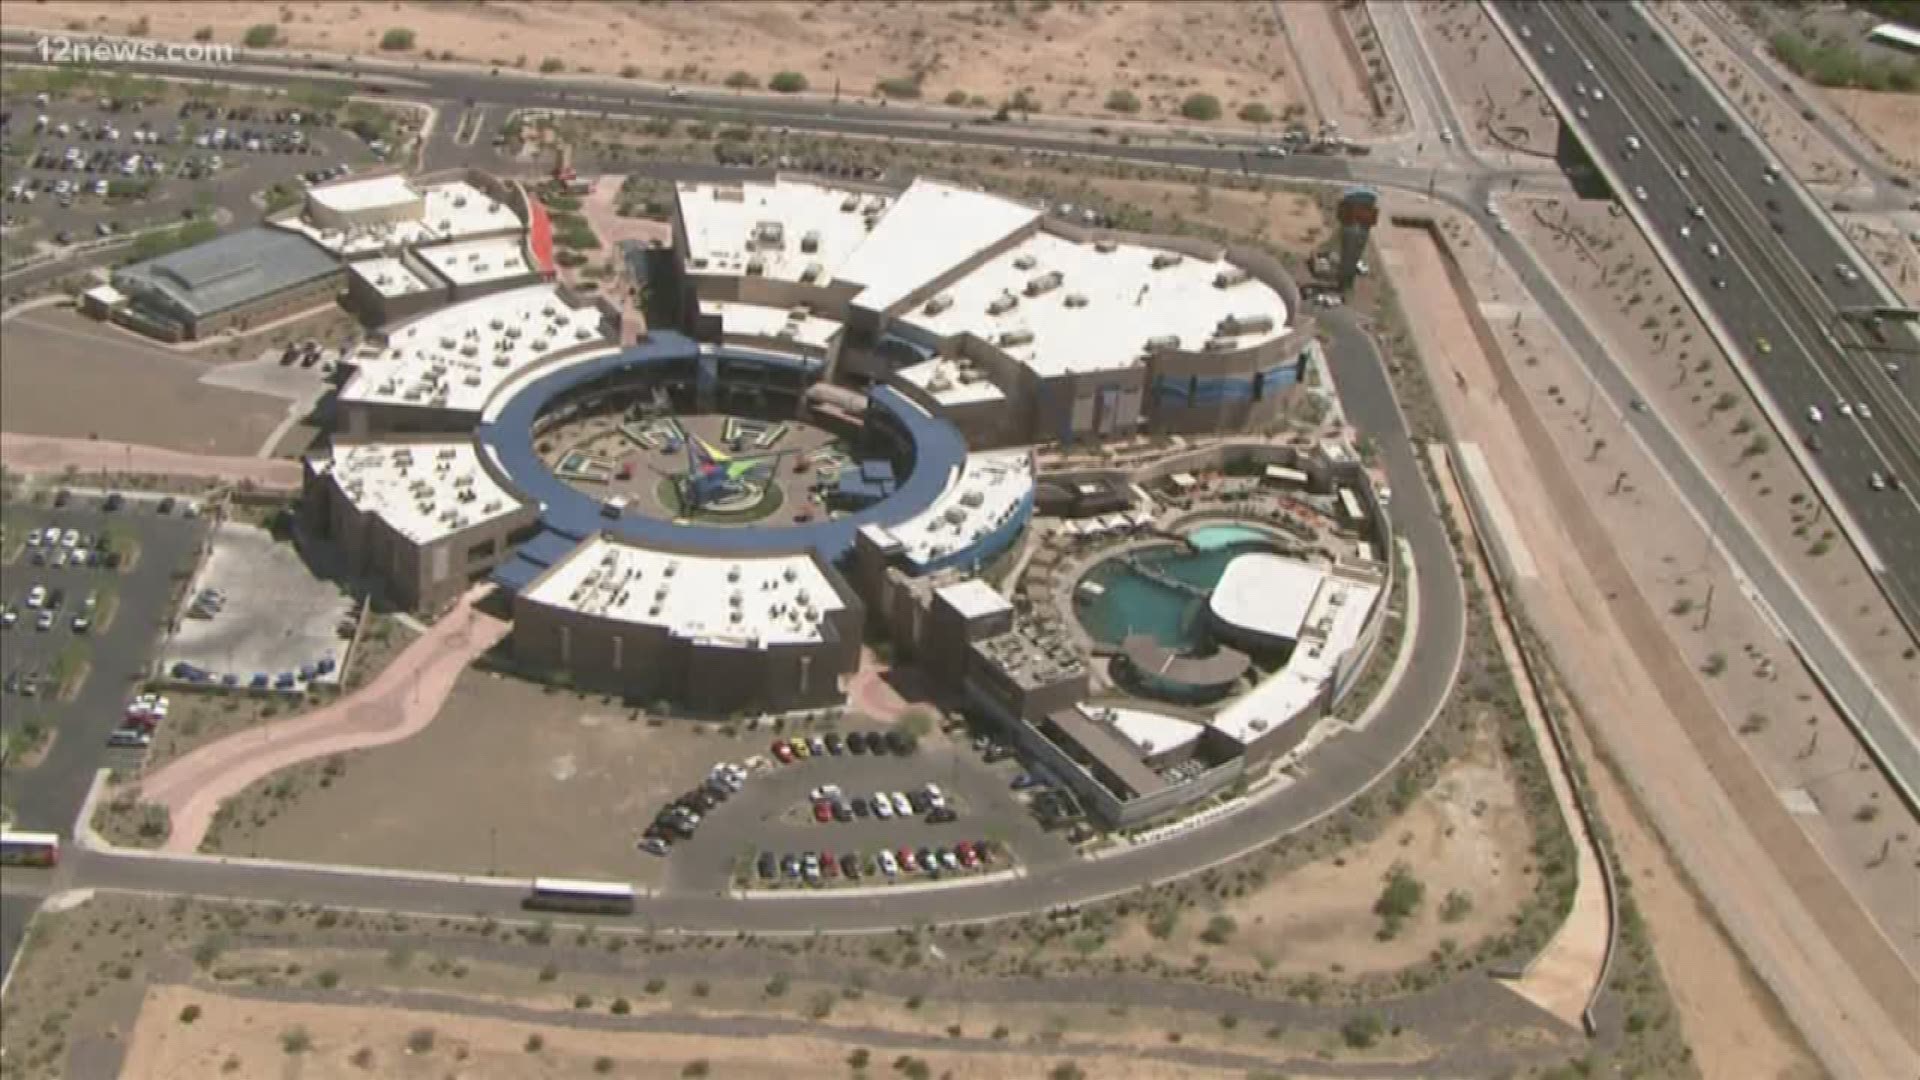 Dolphinaris Arizona, just outside of Scottsdale, is temporarily closing while outside experts reevaluate “all aspects of animal welfare at the facility," the facility announced.